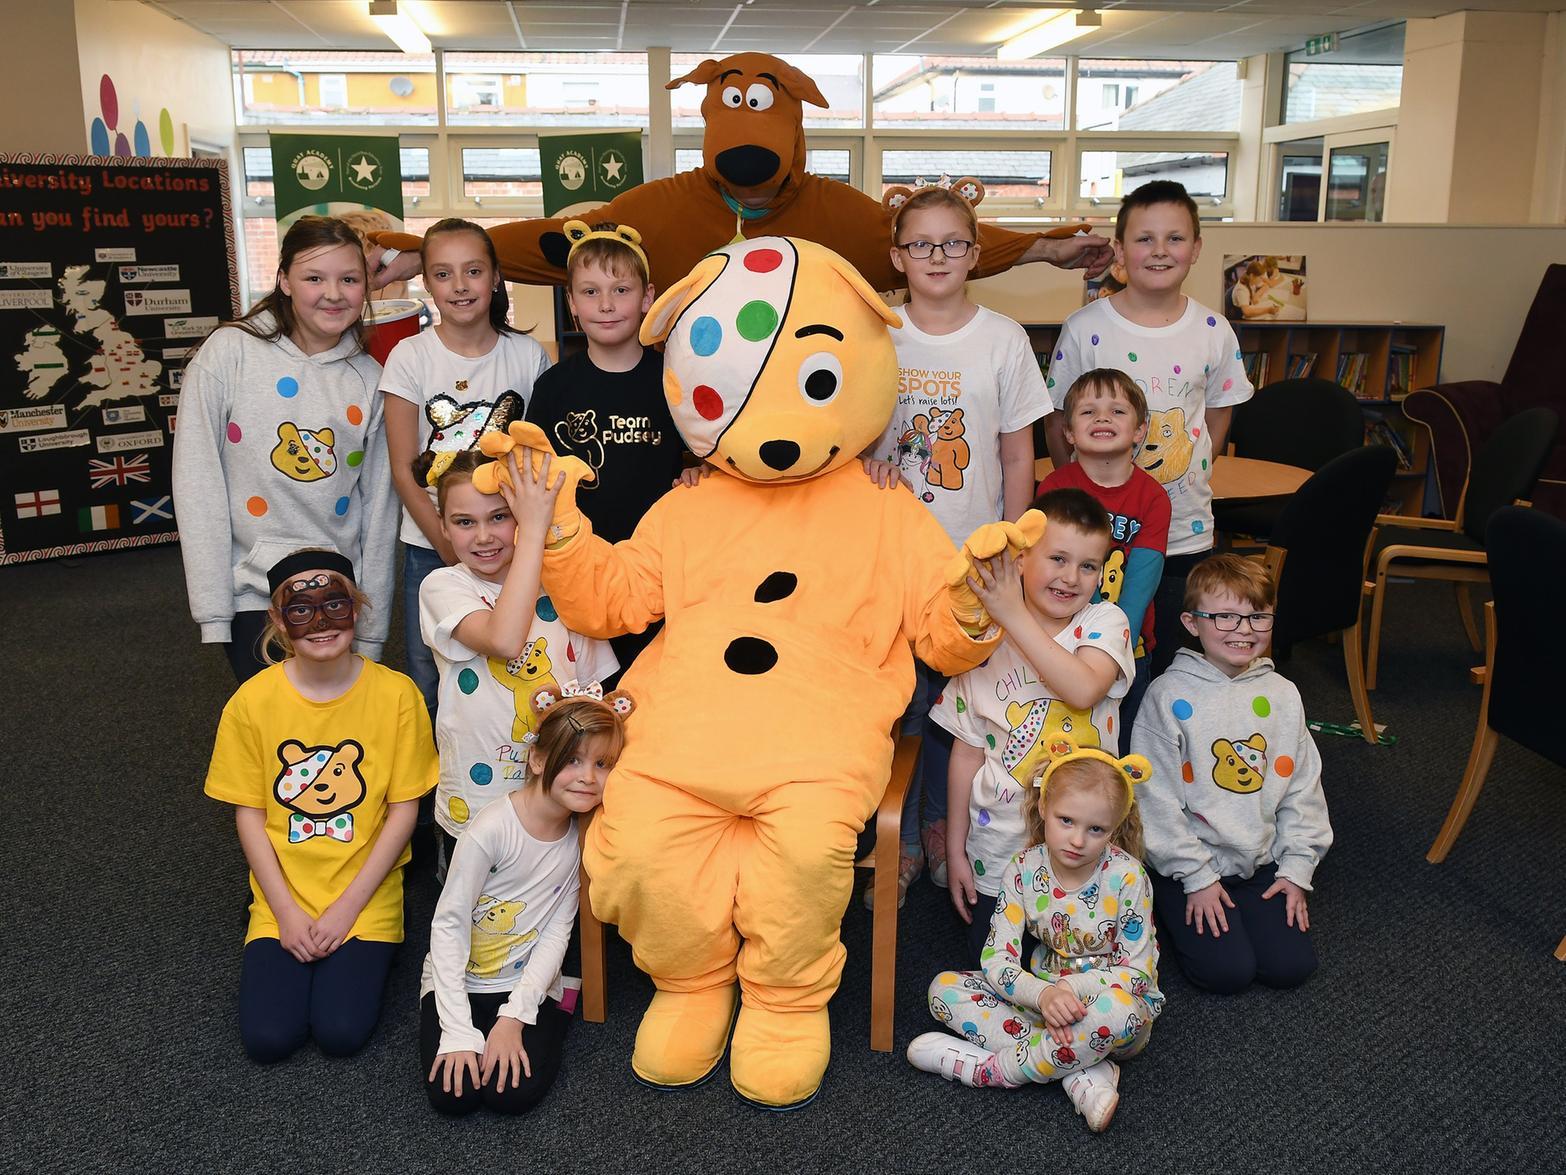 Pudsey pays a visit to Quay Academy School Bridlington. Pictures by Paul Atkinson: NBFP PA1946-9b